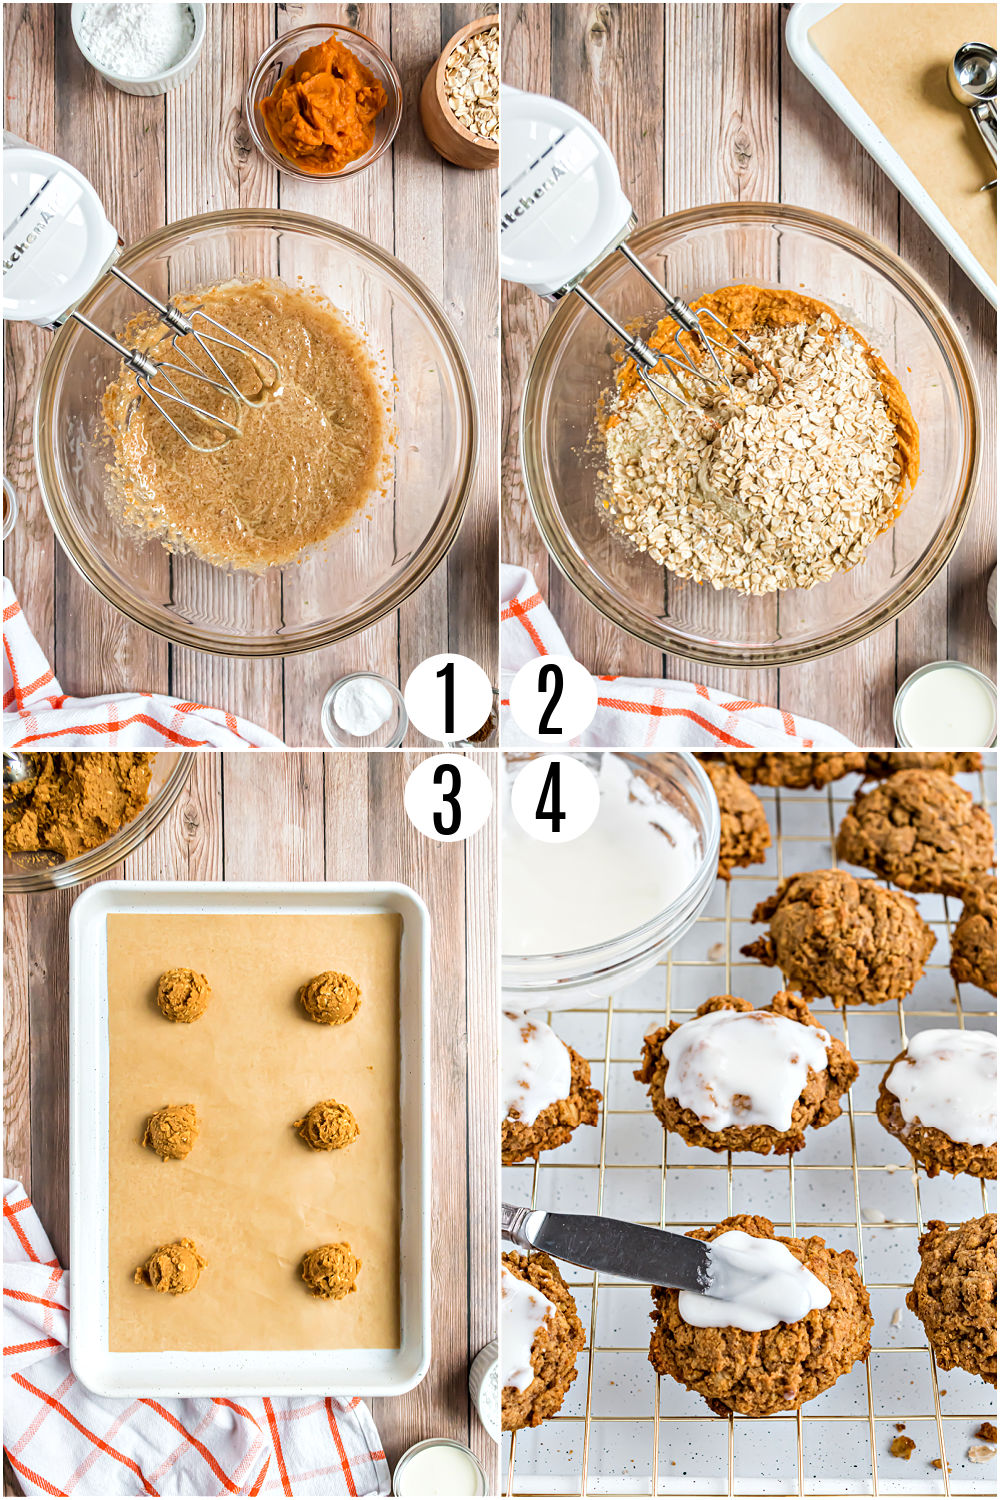 Step by step photos showing how to make healthy pumpkin cookies with icing.